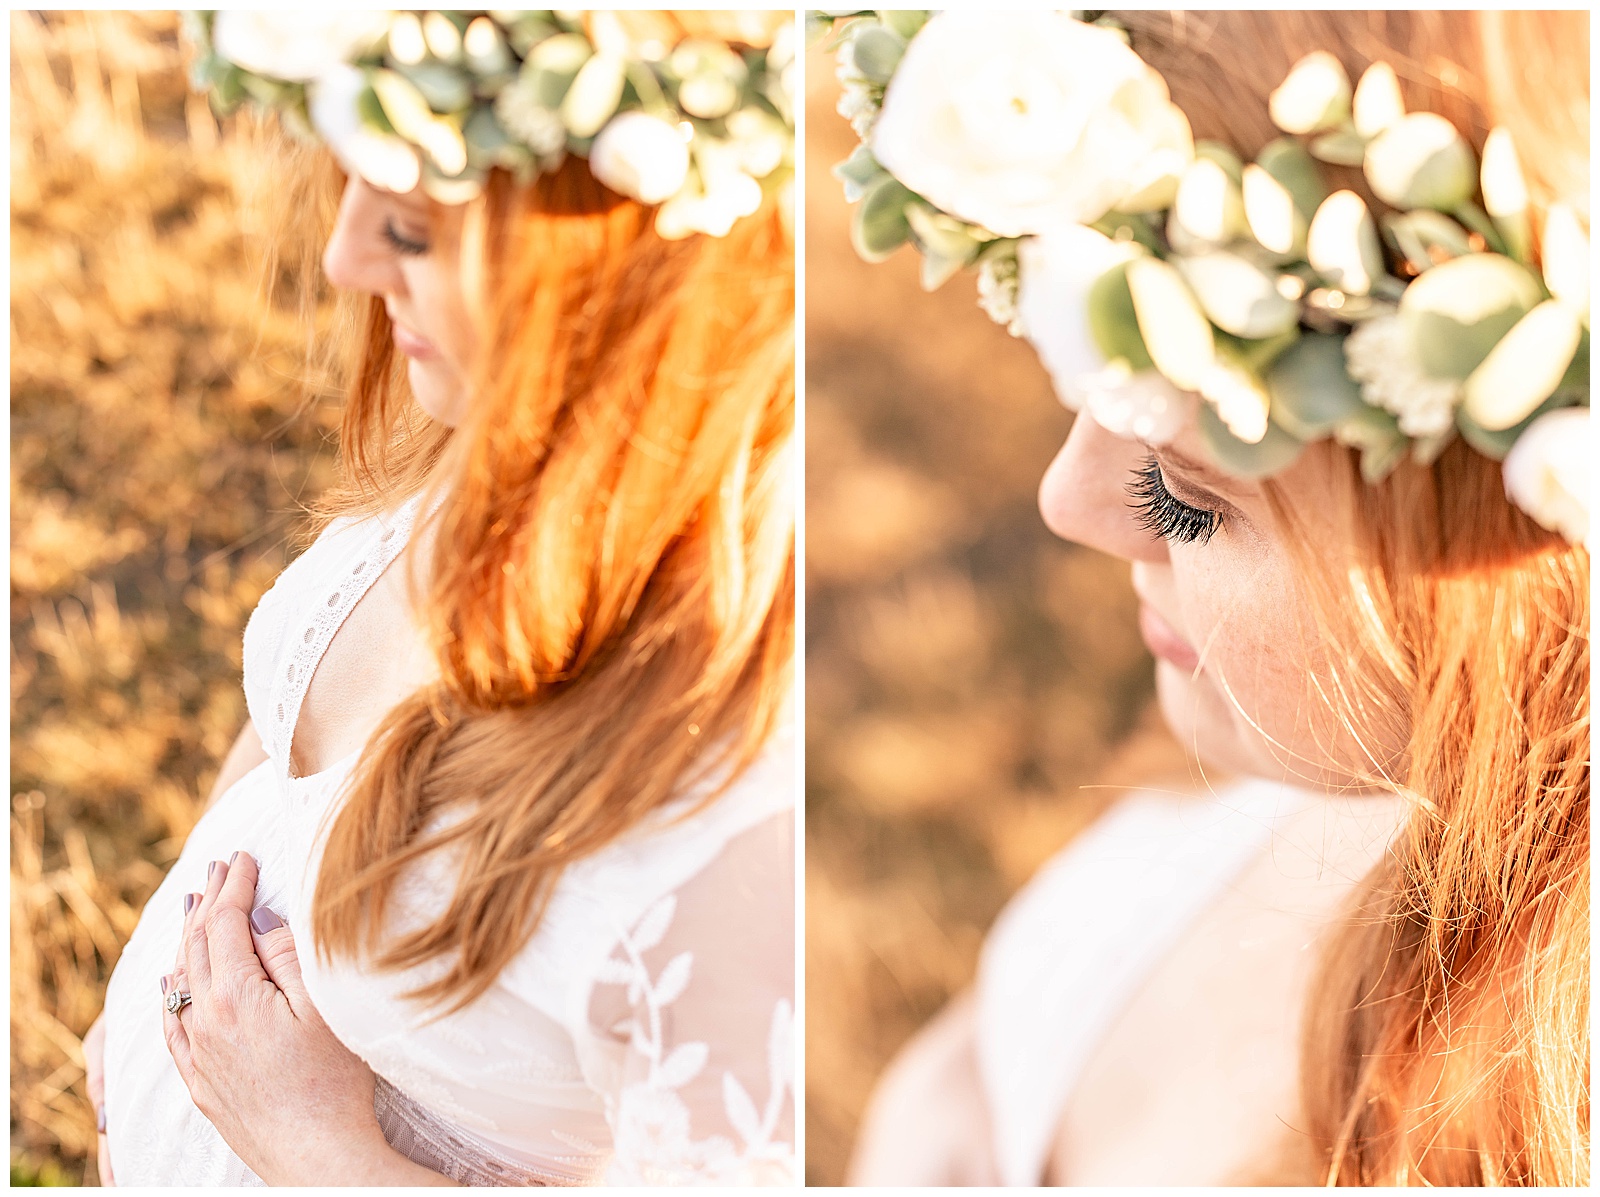 Maternity Photos with white lace dress and white and green floral crown